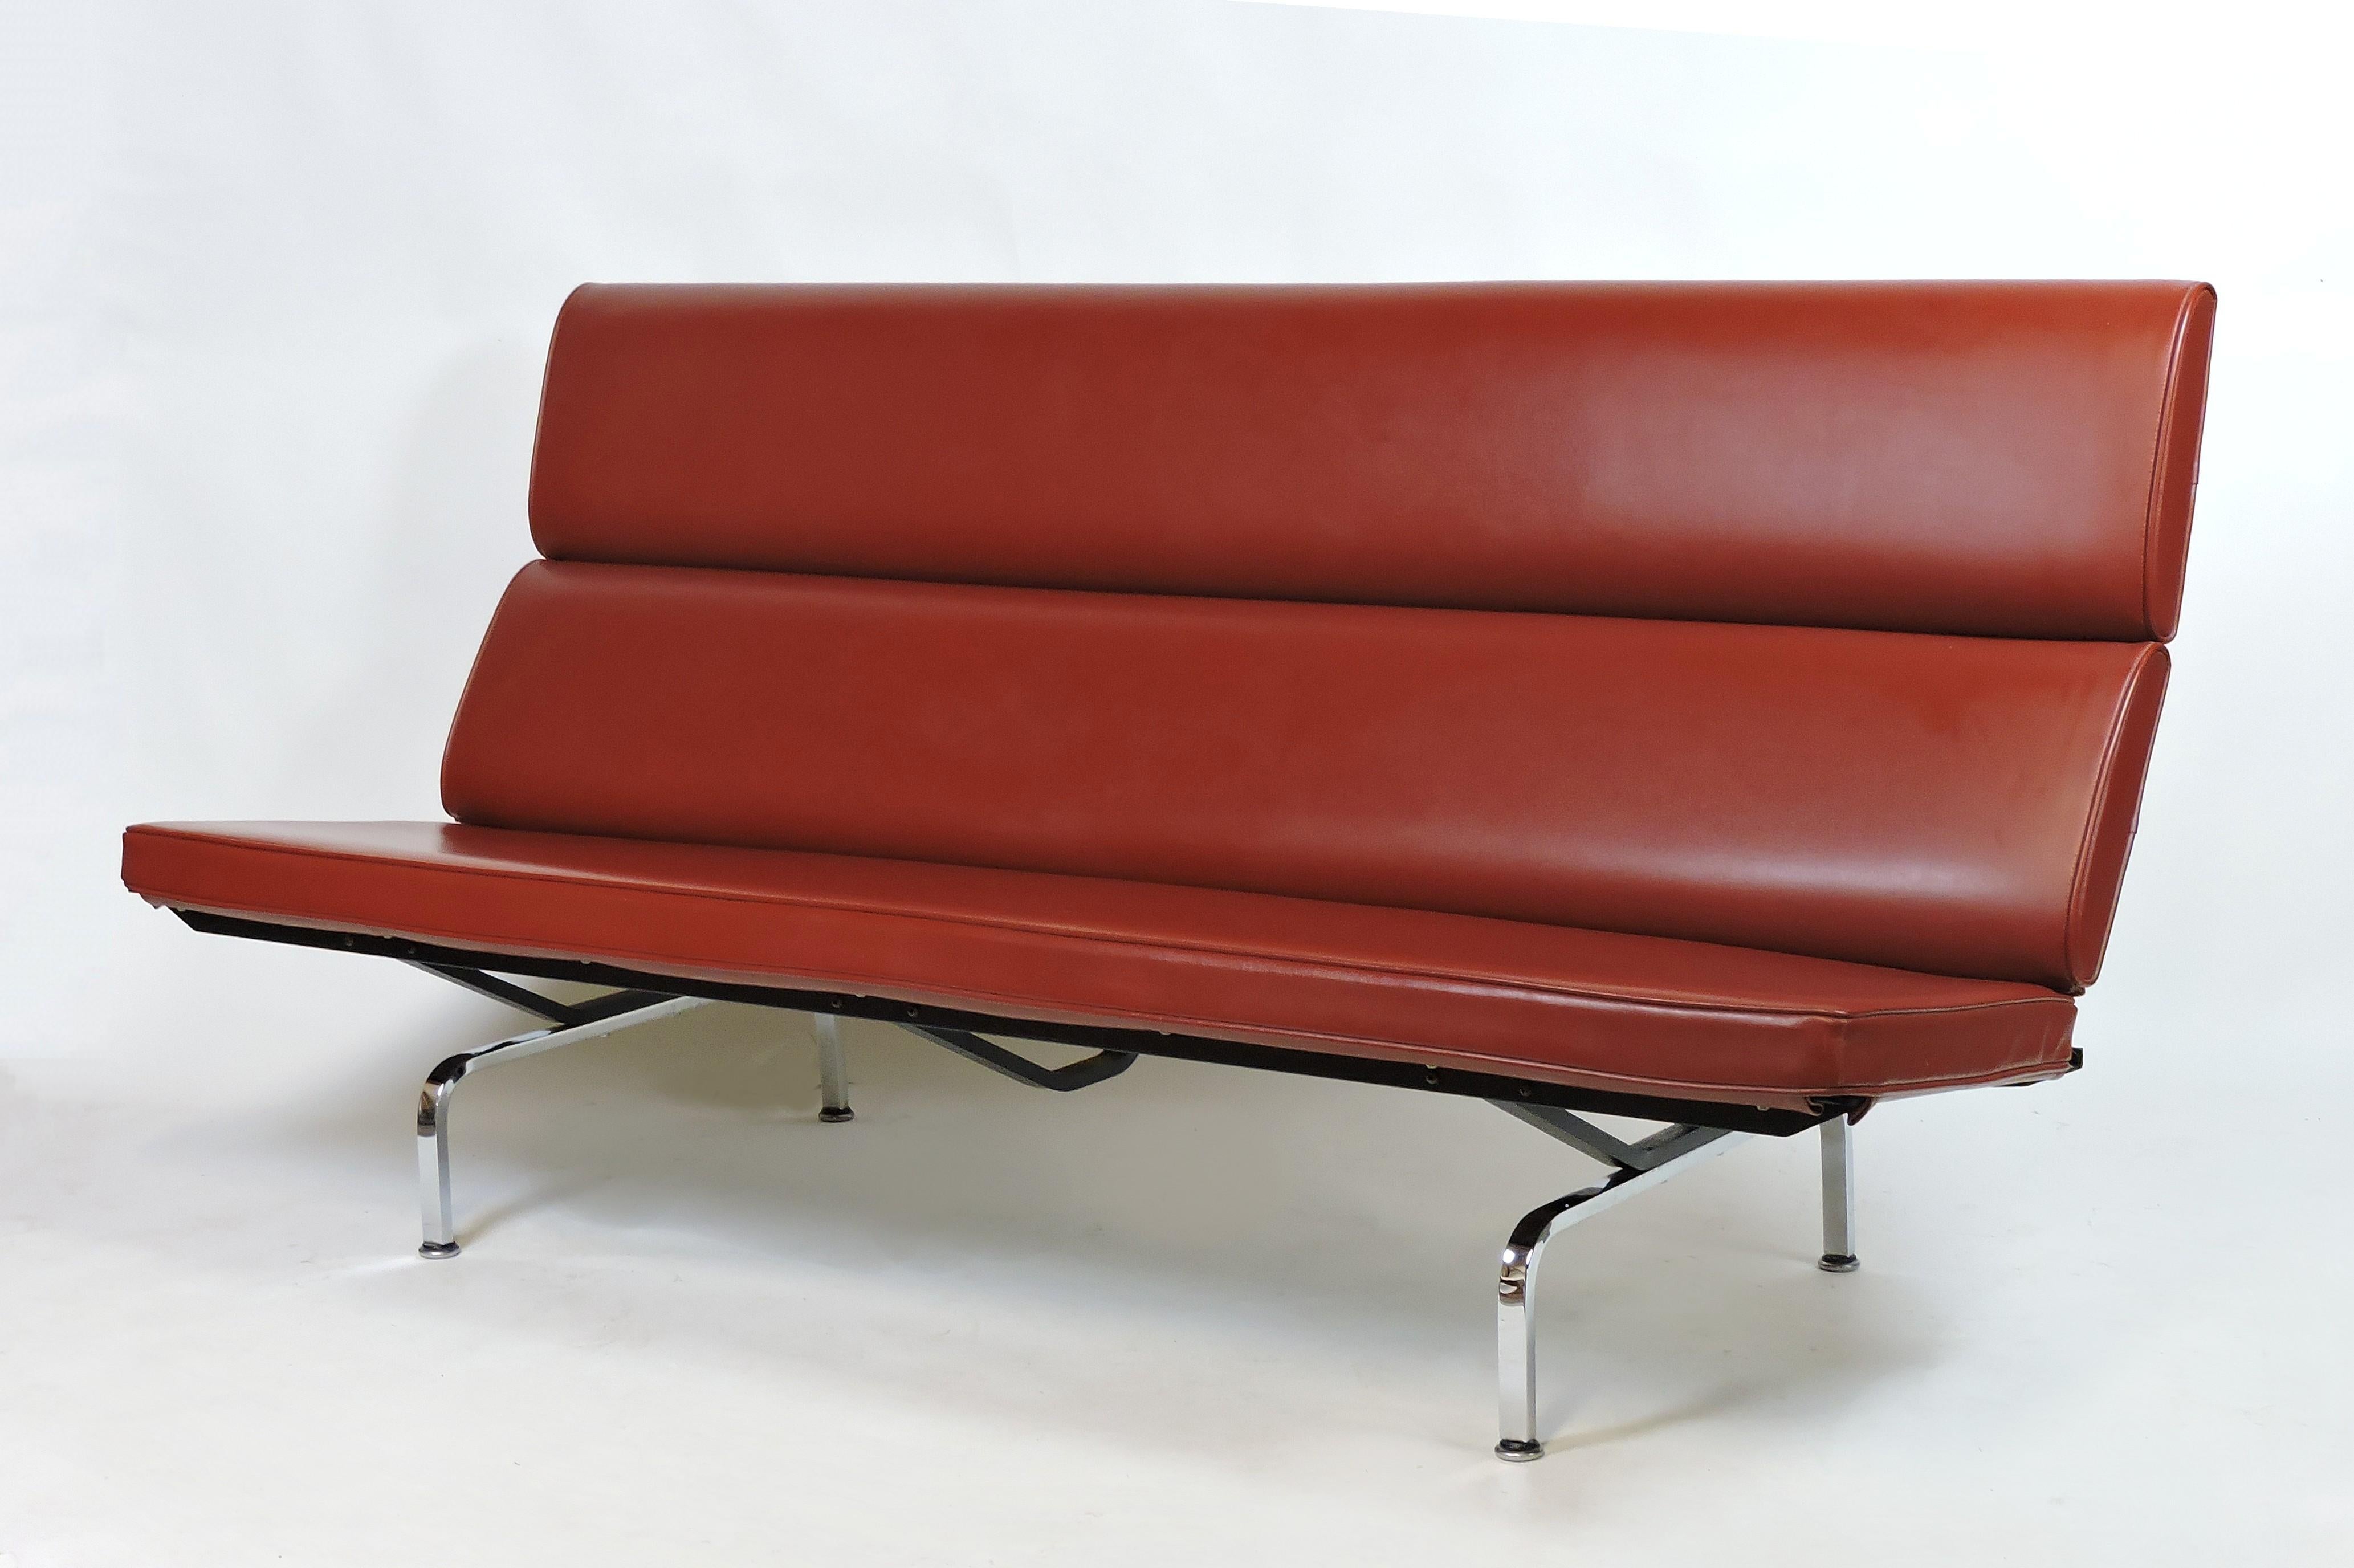 American Eames Mid-Century Modern Compact Sofa by Herman Miller